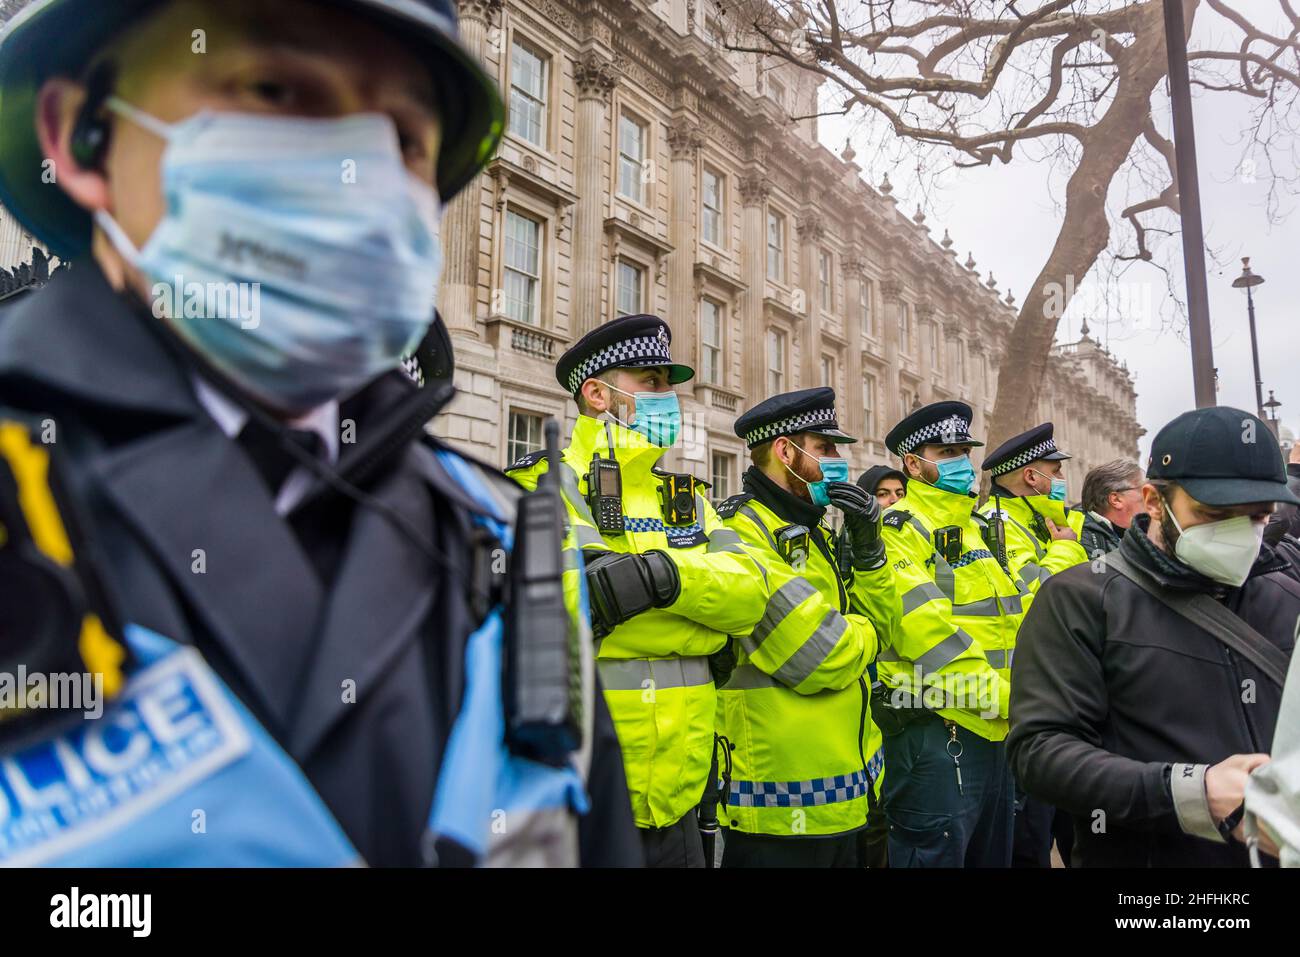 A line of police officers on the Whitehall during 'Kill the Bill' demonstration. London, England, UK 15.01.2022 Stock Photo